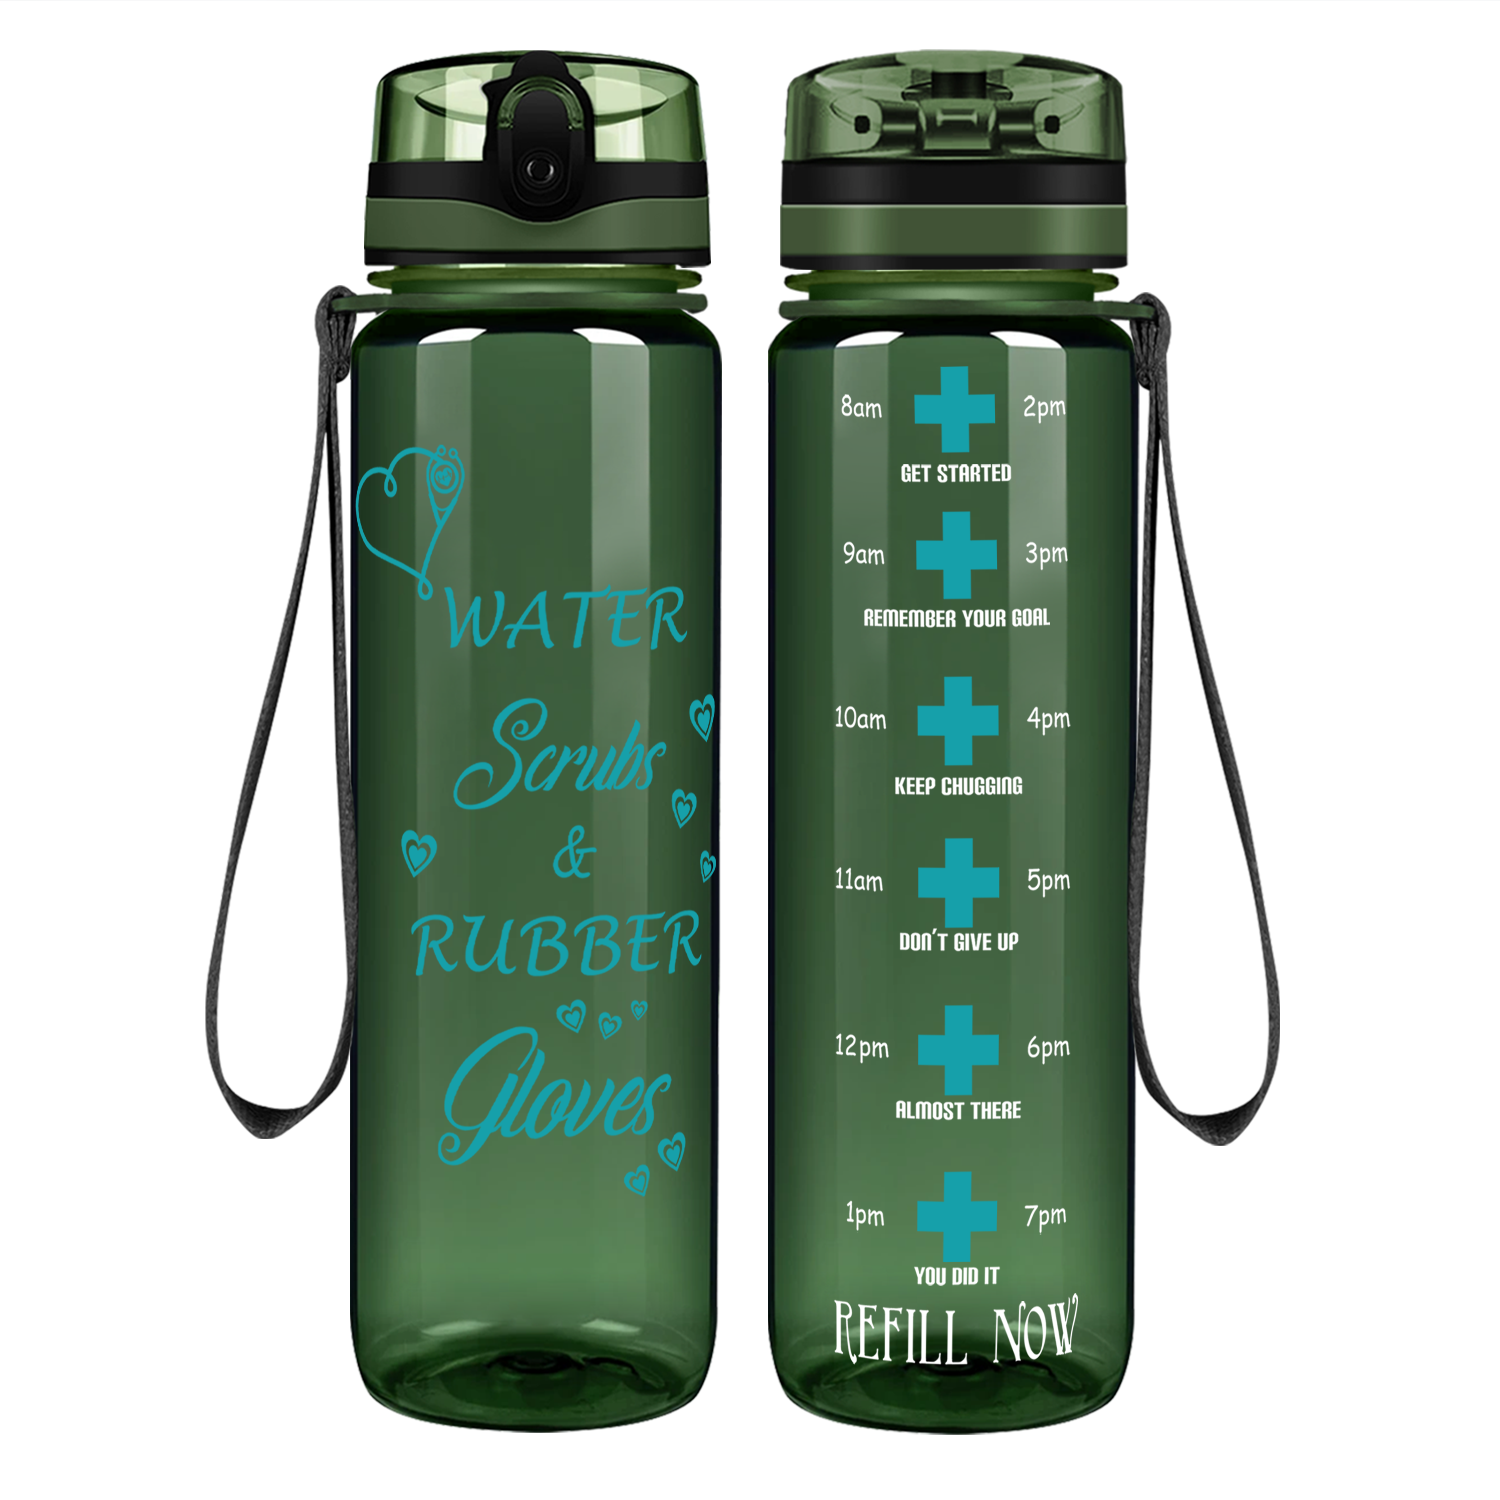 Water Scrubs and Rubber Gloves on 32oz Motivational Tracking Nurse Water Bottle